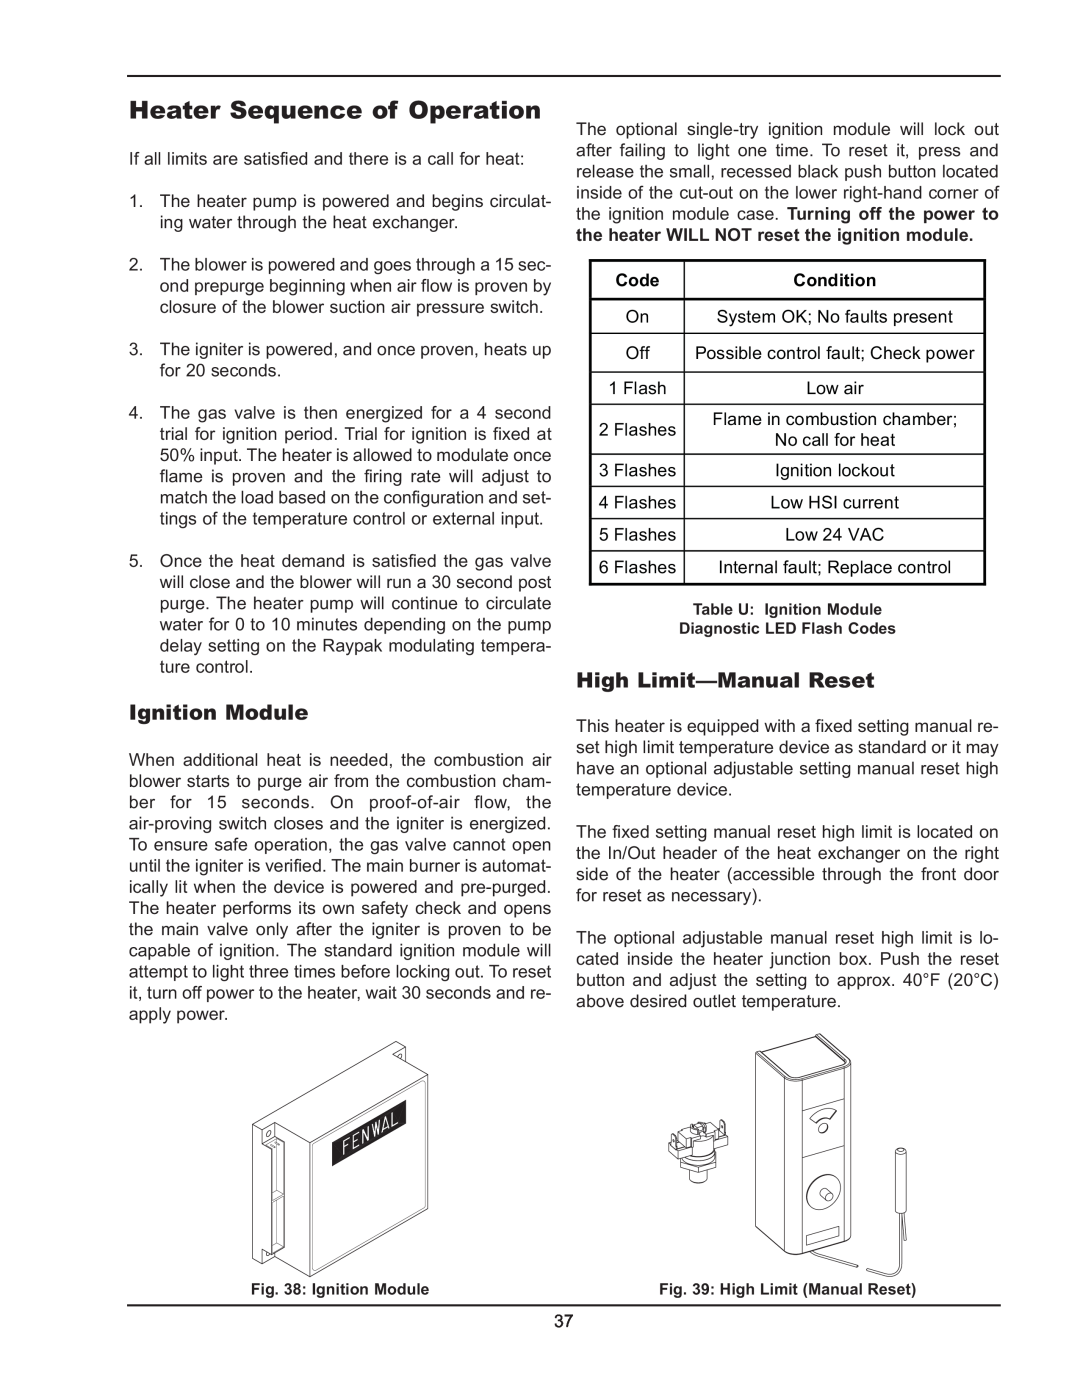 Raypak 5042004 Heater Sequence of Operation, Ignition Module, High Limit—ManualReset, Code, Condition 